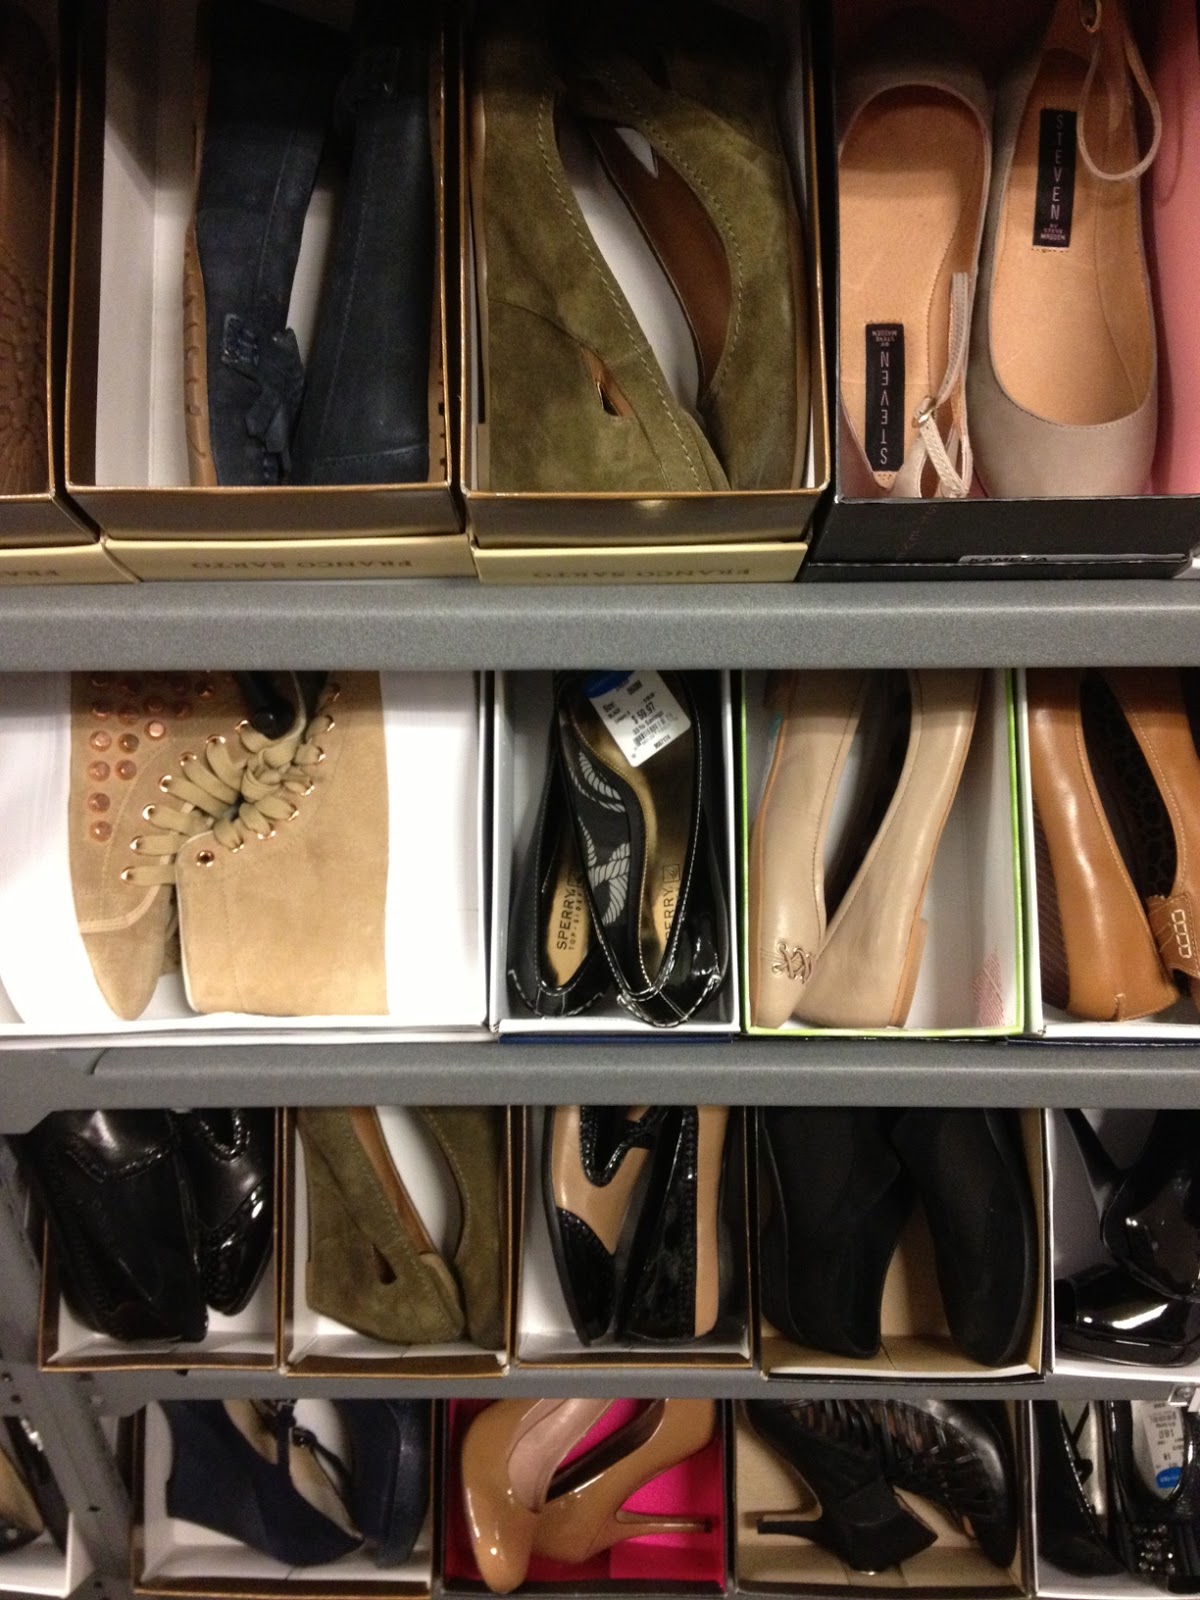 Seattle: Nordstrom Rack at Northgate Opens Tomorrow, Thurs 118!